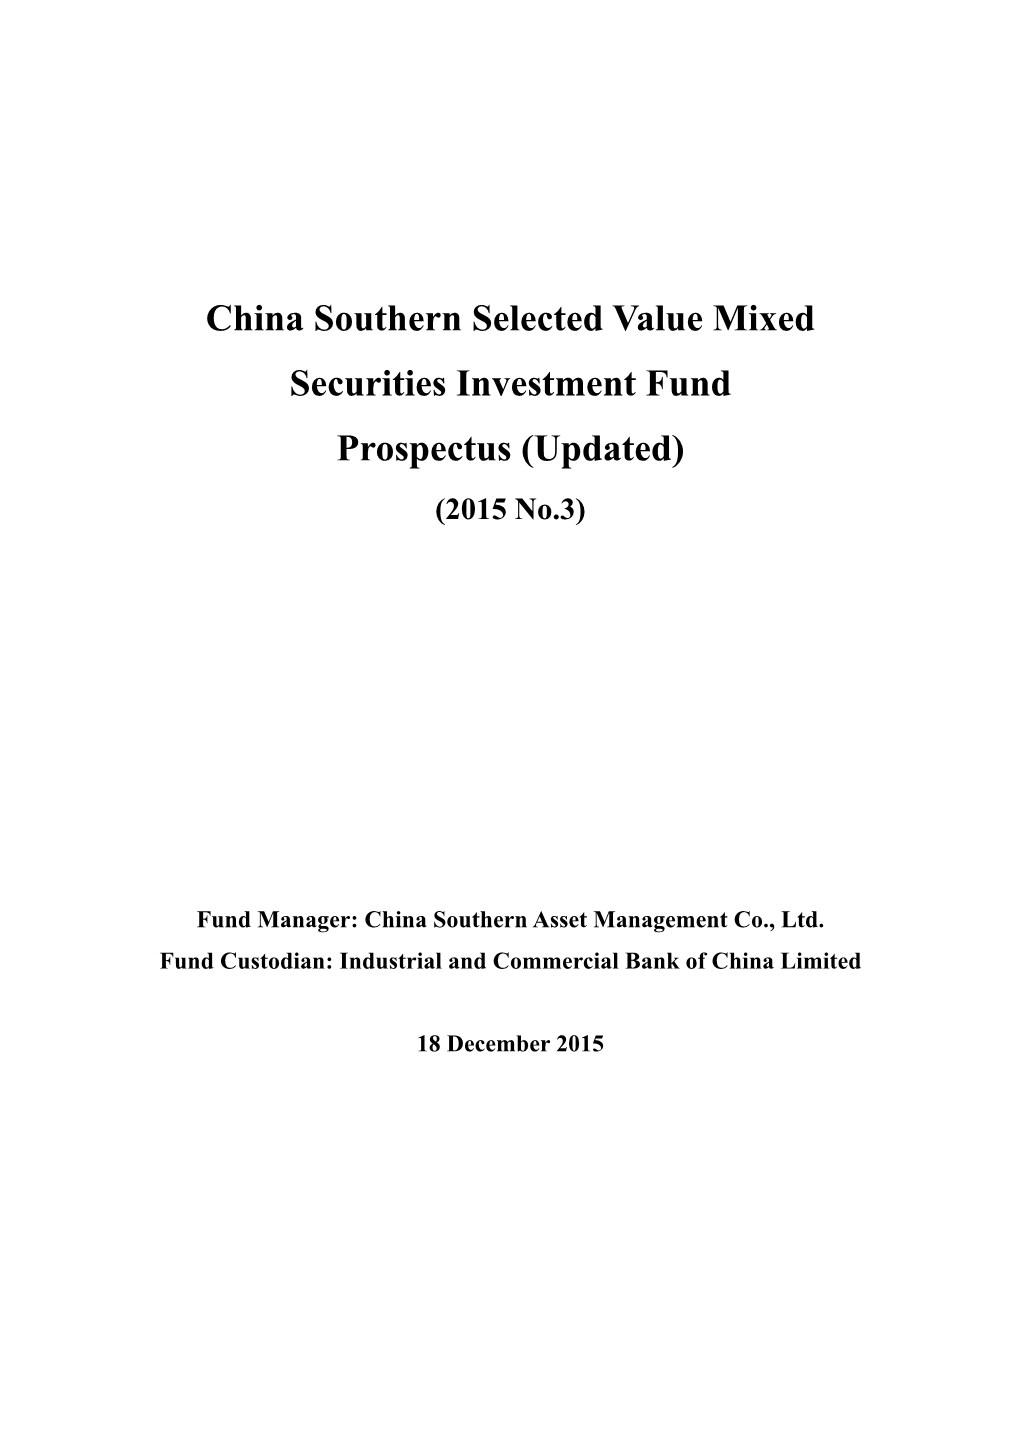 China Southern Selected Value Mixed Securities Investment Fund Prospectus (Updated)